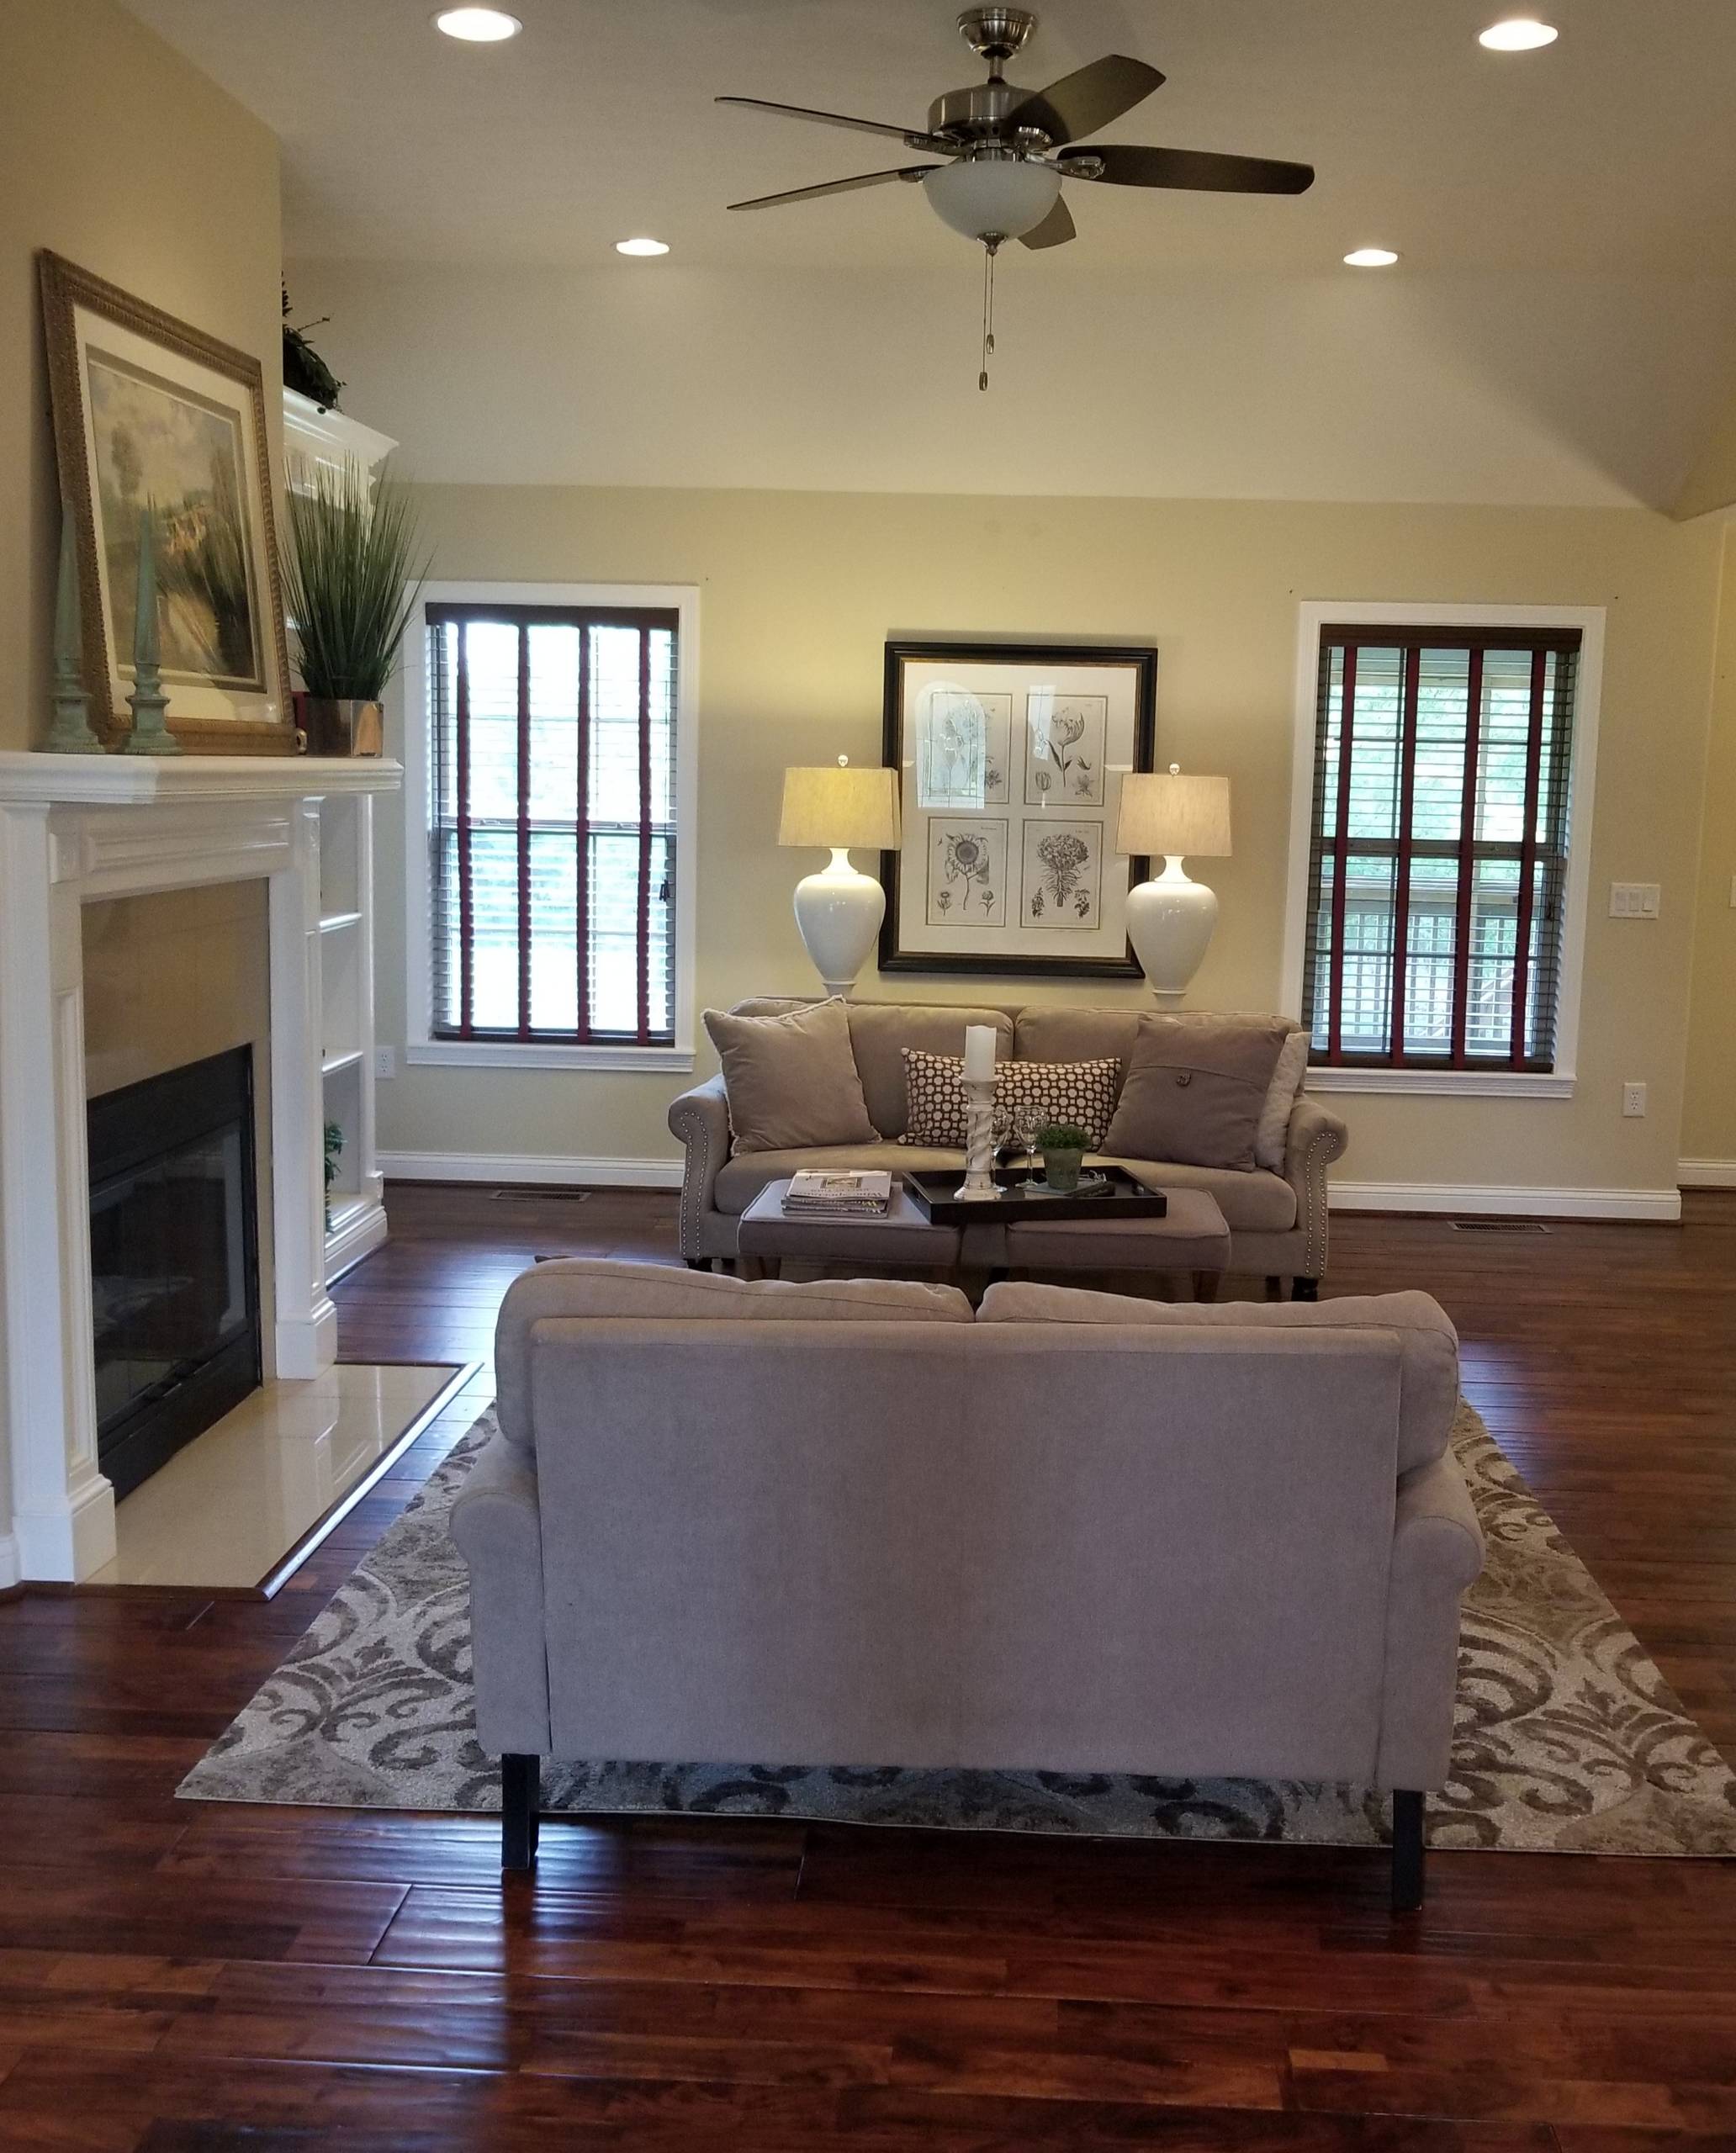 Home Staging Works! (in Jeffersonville, IN)